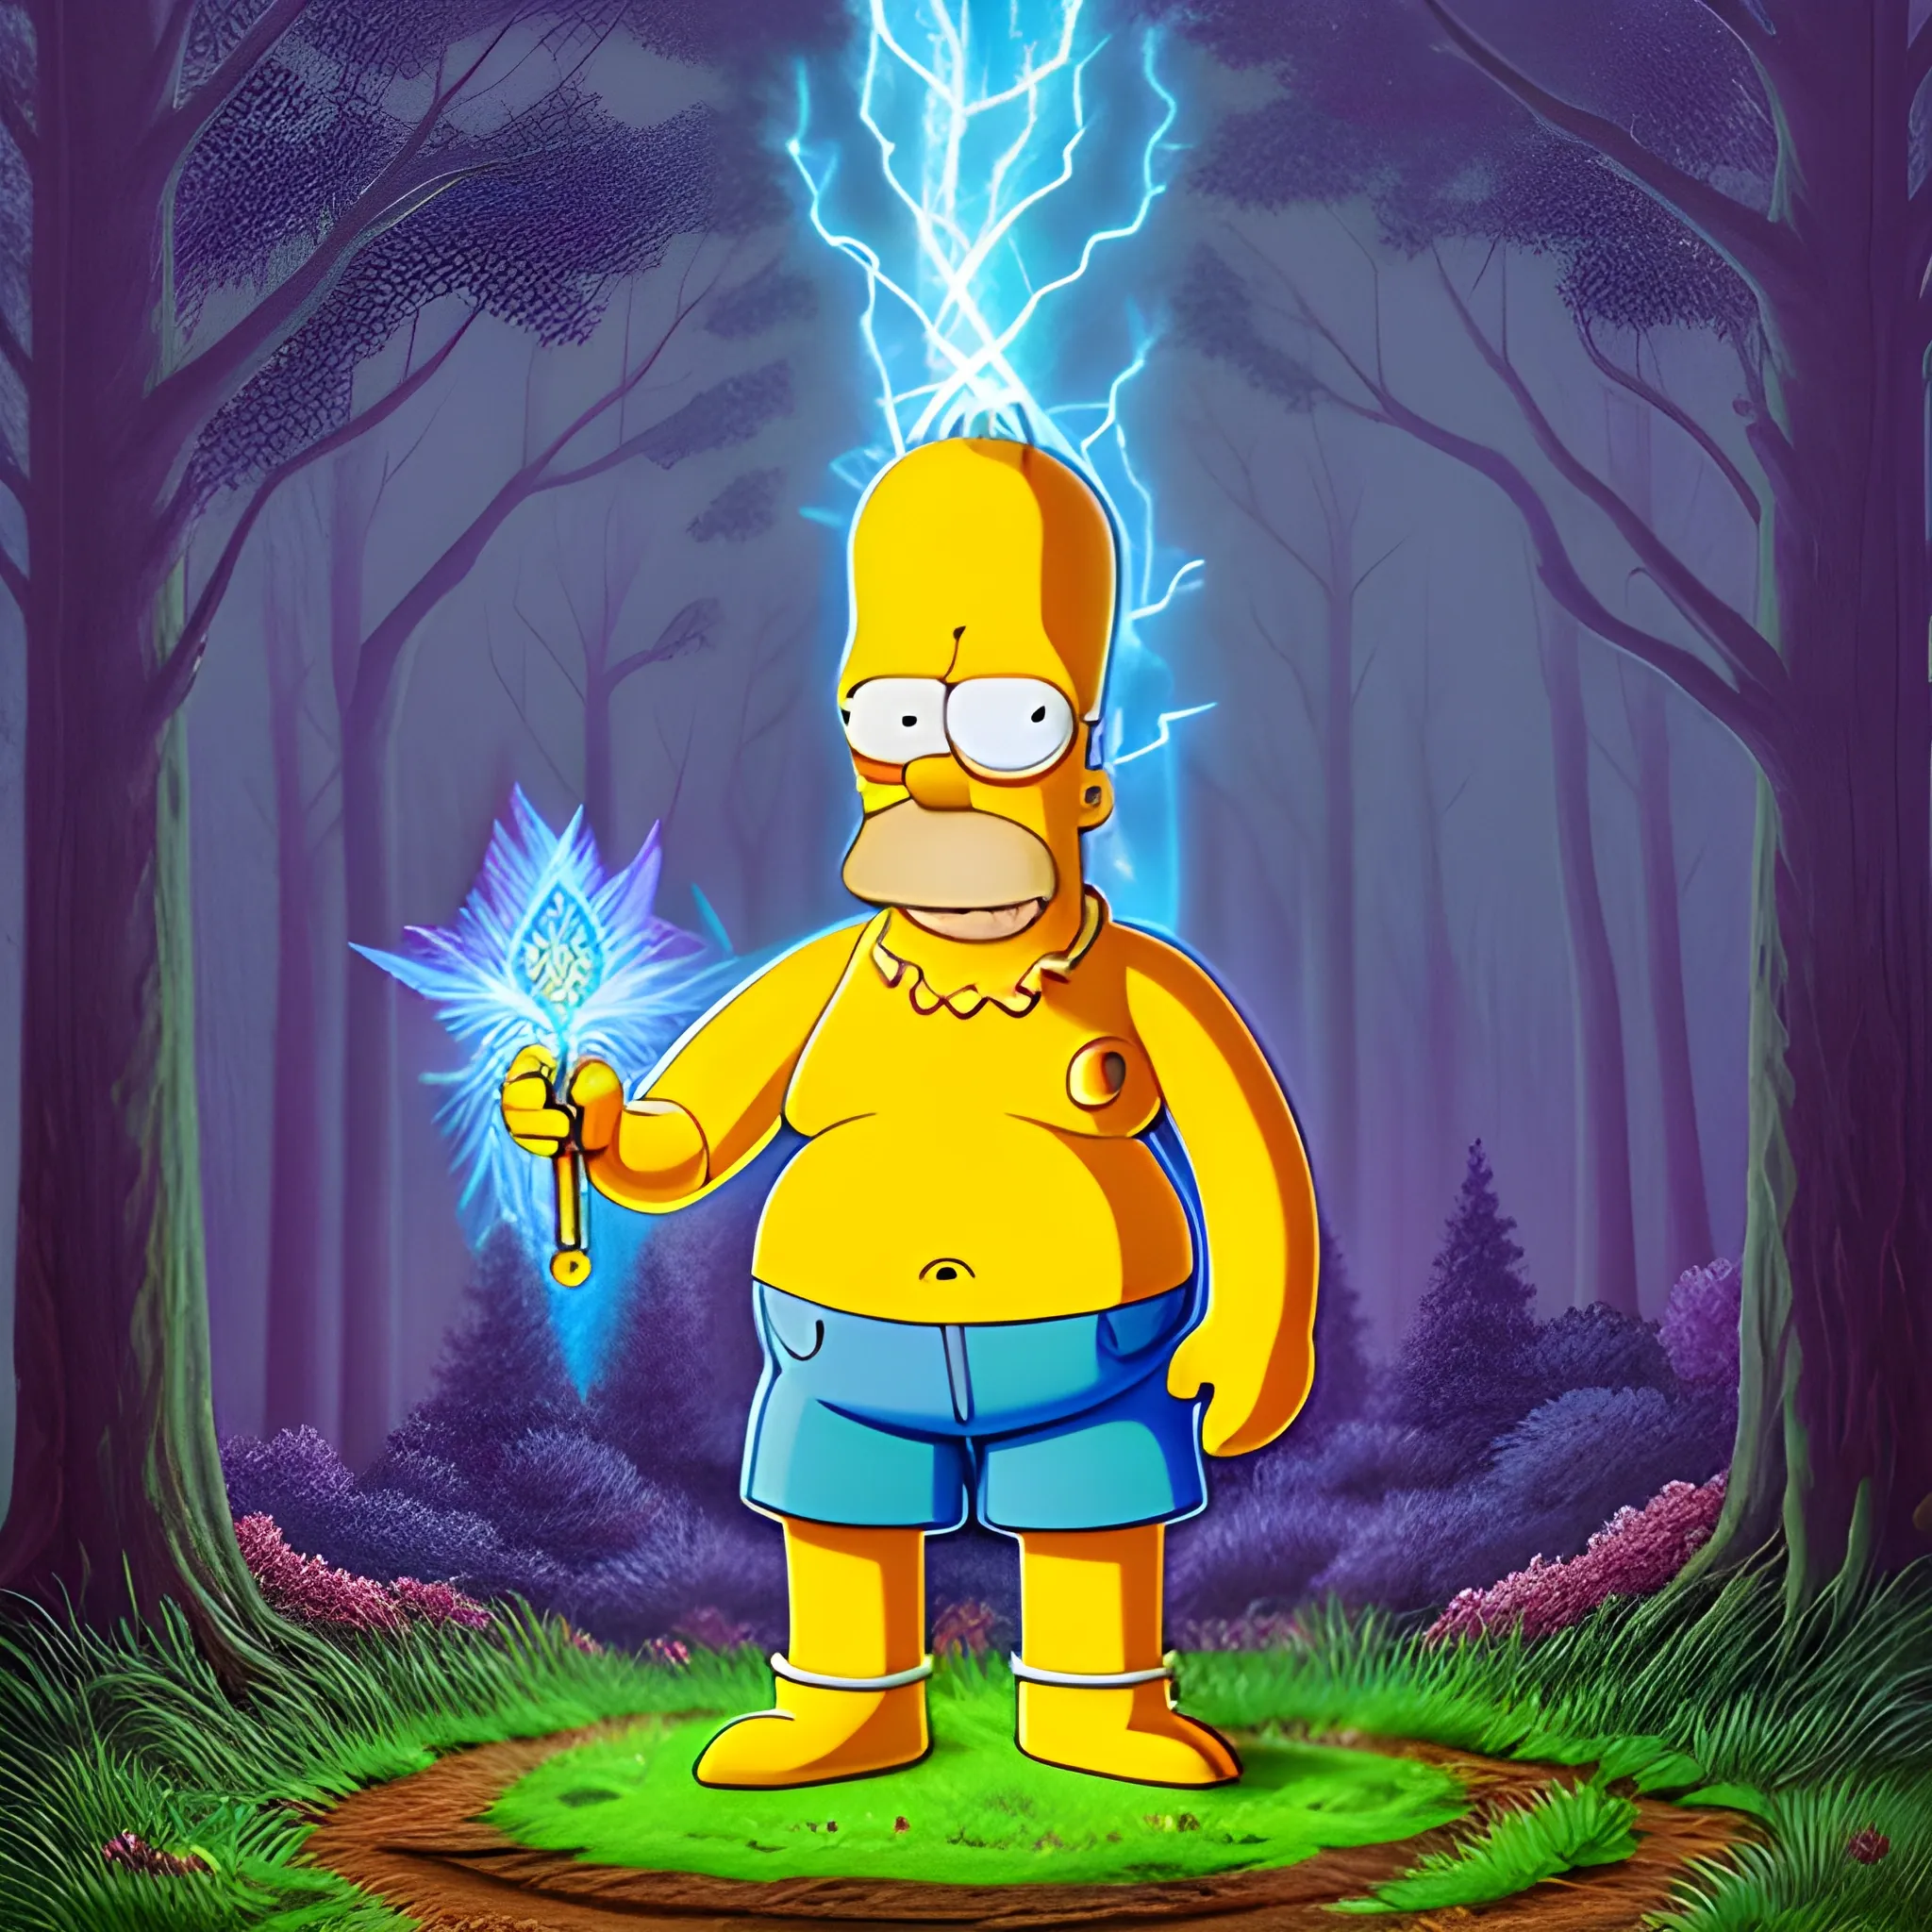 Homer Simpson, standing in the middle of the forrest path, dressed in a hyper detailed sorcerer's outfit; holds a hyper detailed magic wand from which a ray of light emanates, hyper detailed background; The Simpsons cartoon style